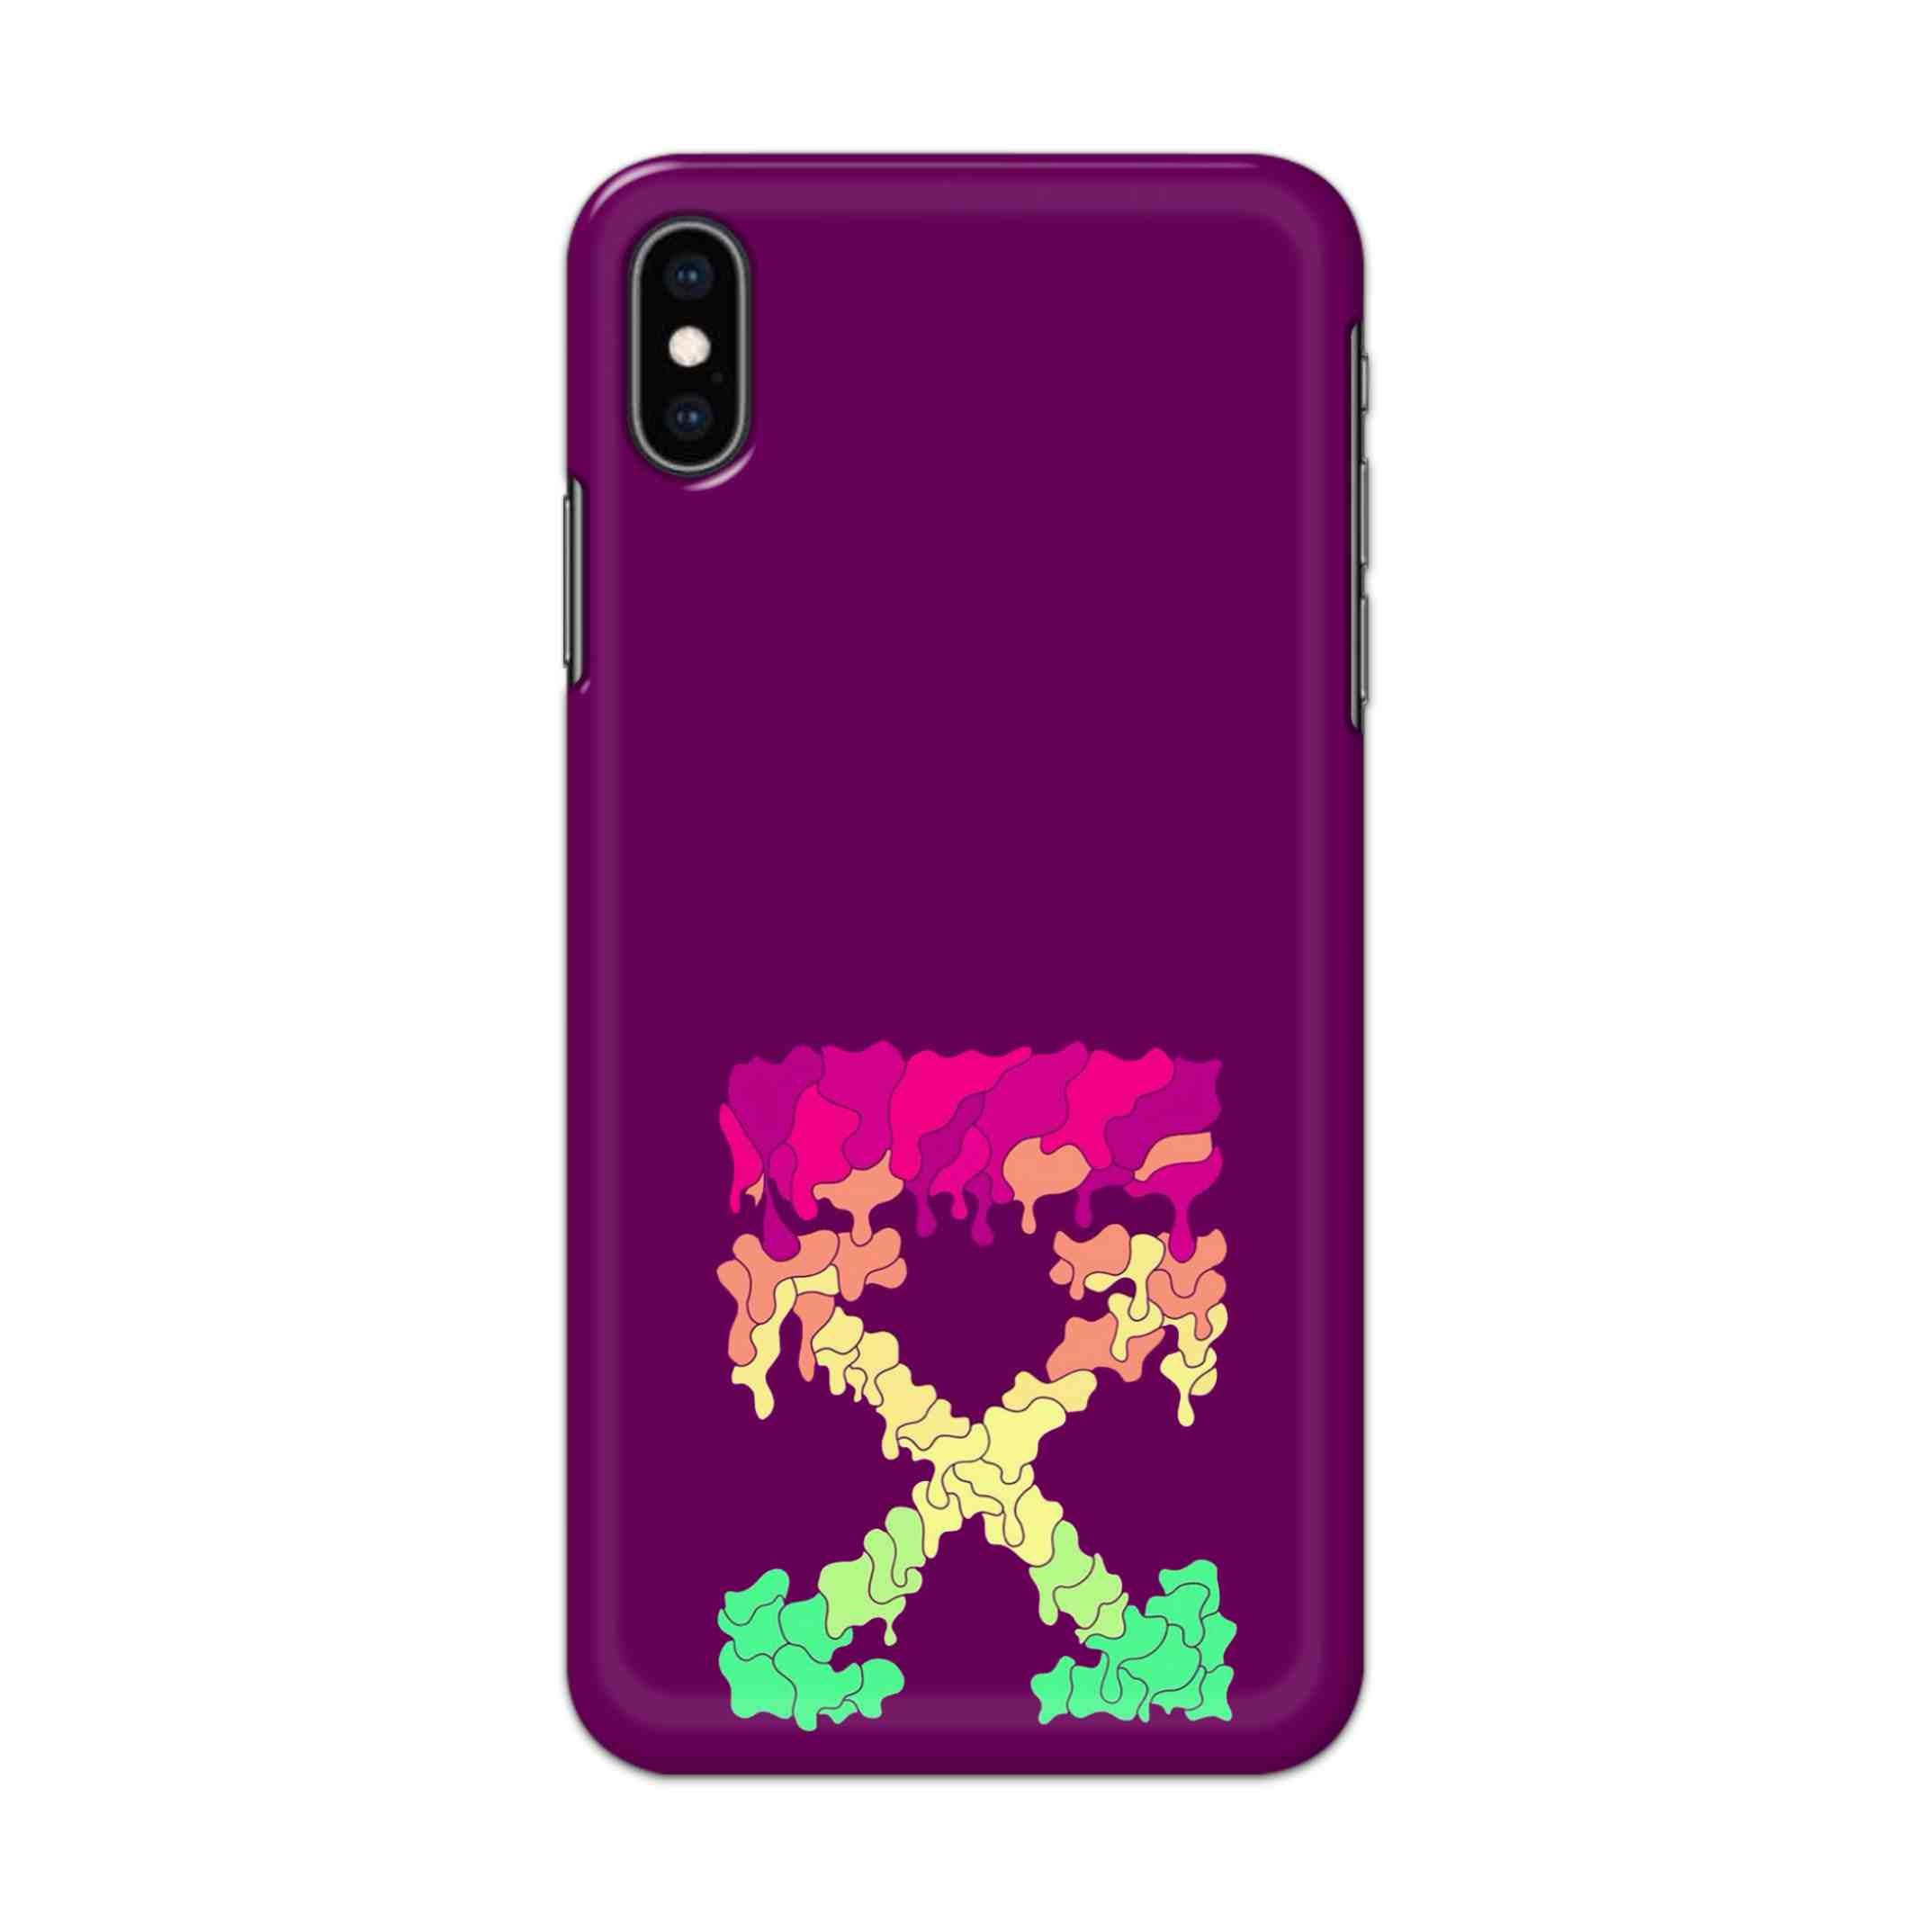 Buy X.O Hard Back Mobile Phone Case/Cover For iPhone XS MAX Online